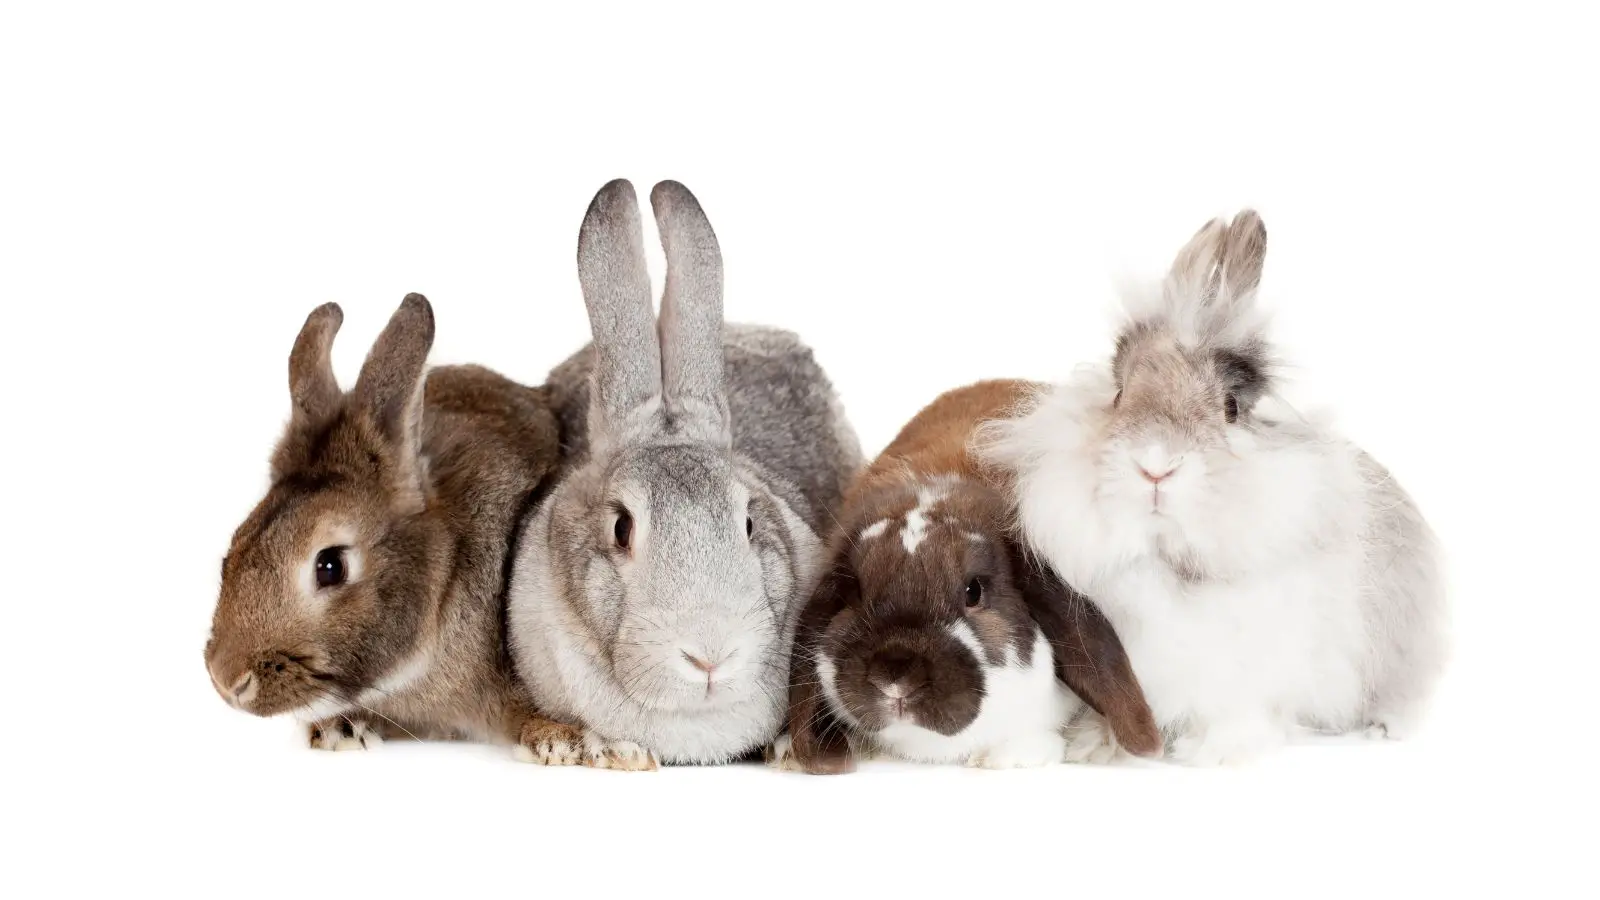 Different breeds of bunnies - abouteverythingpets.com